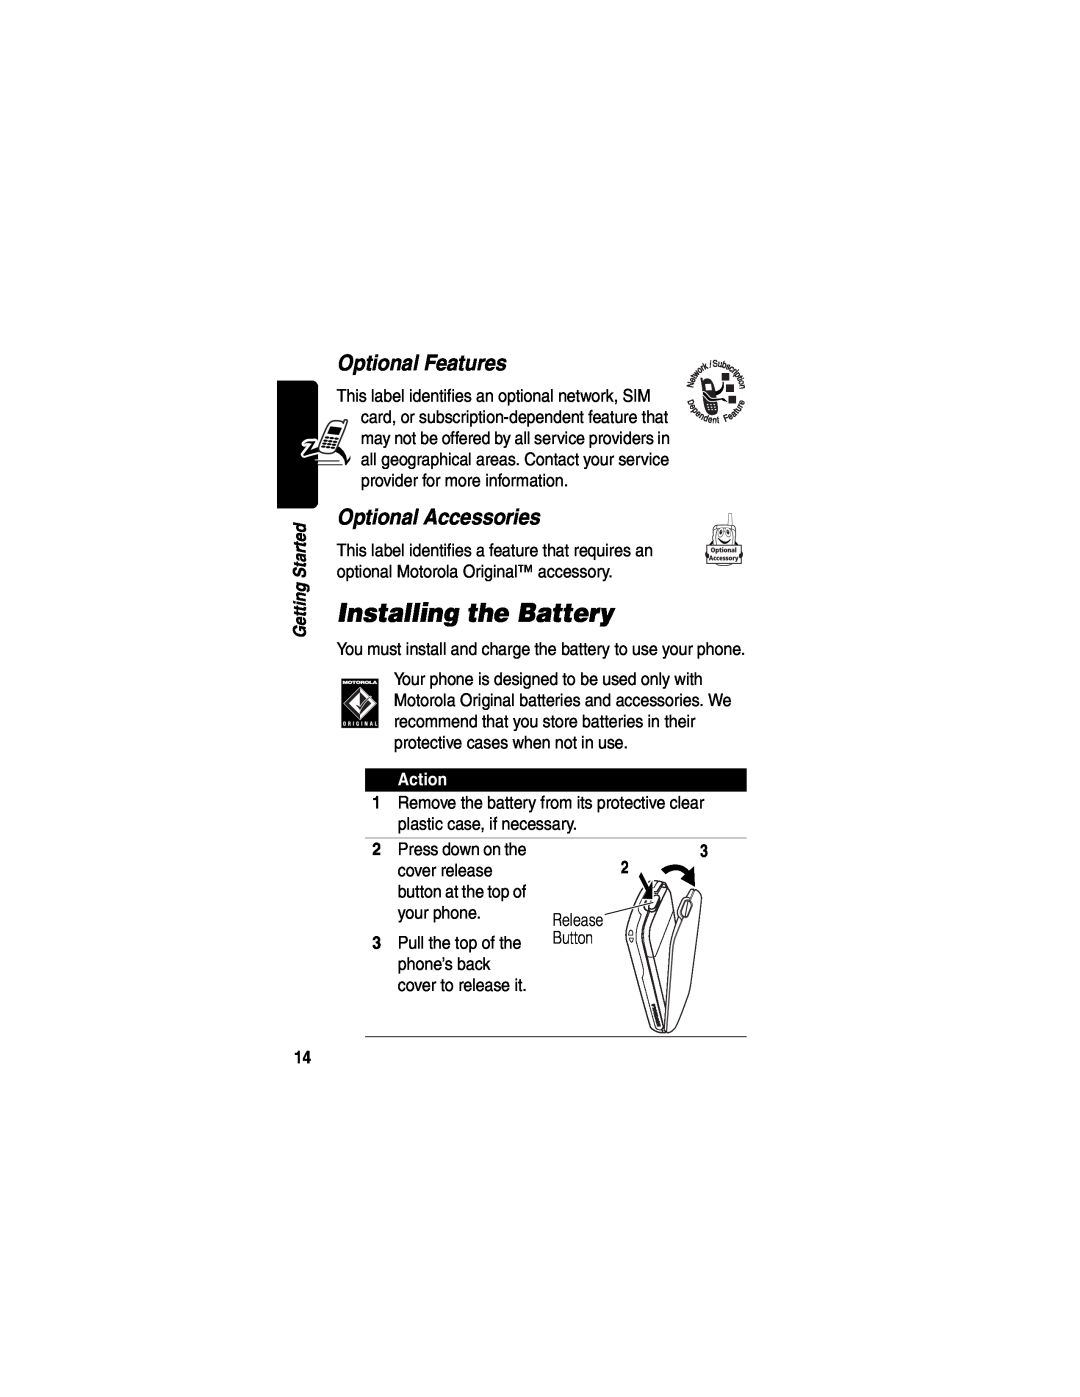 Motorola WIRELESS TELEPHONE manual Installing the Battery, Optional Features, Optional Accessories, Action 